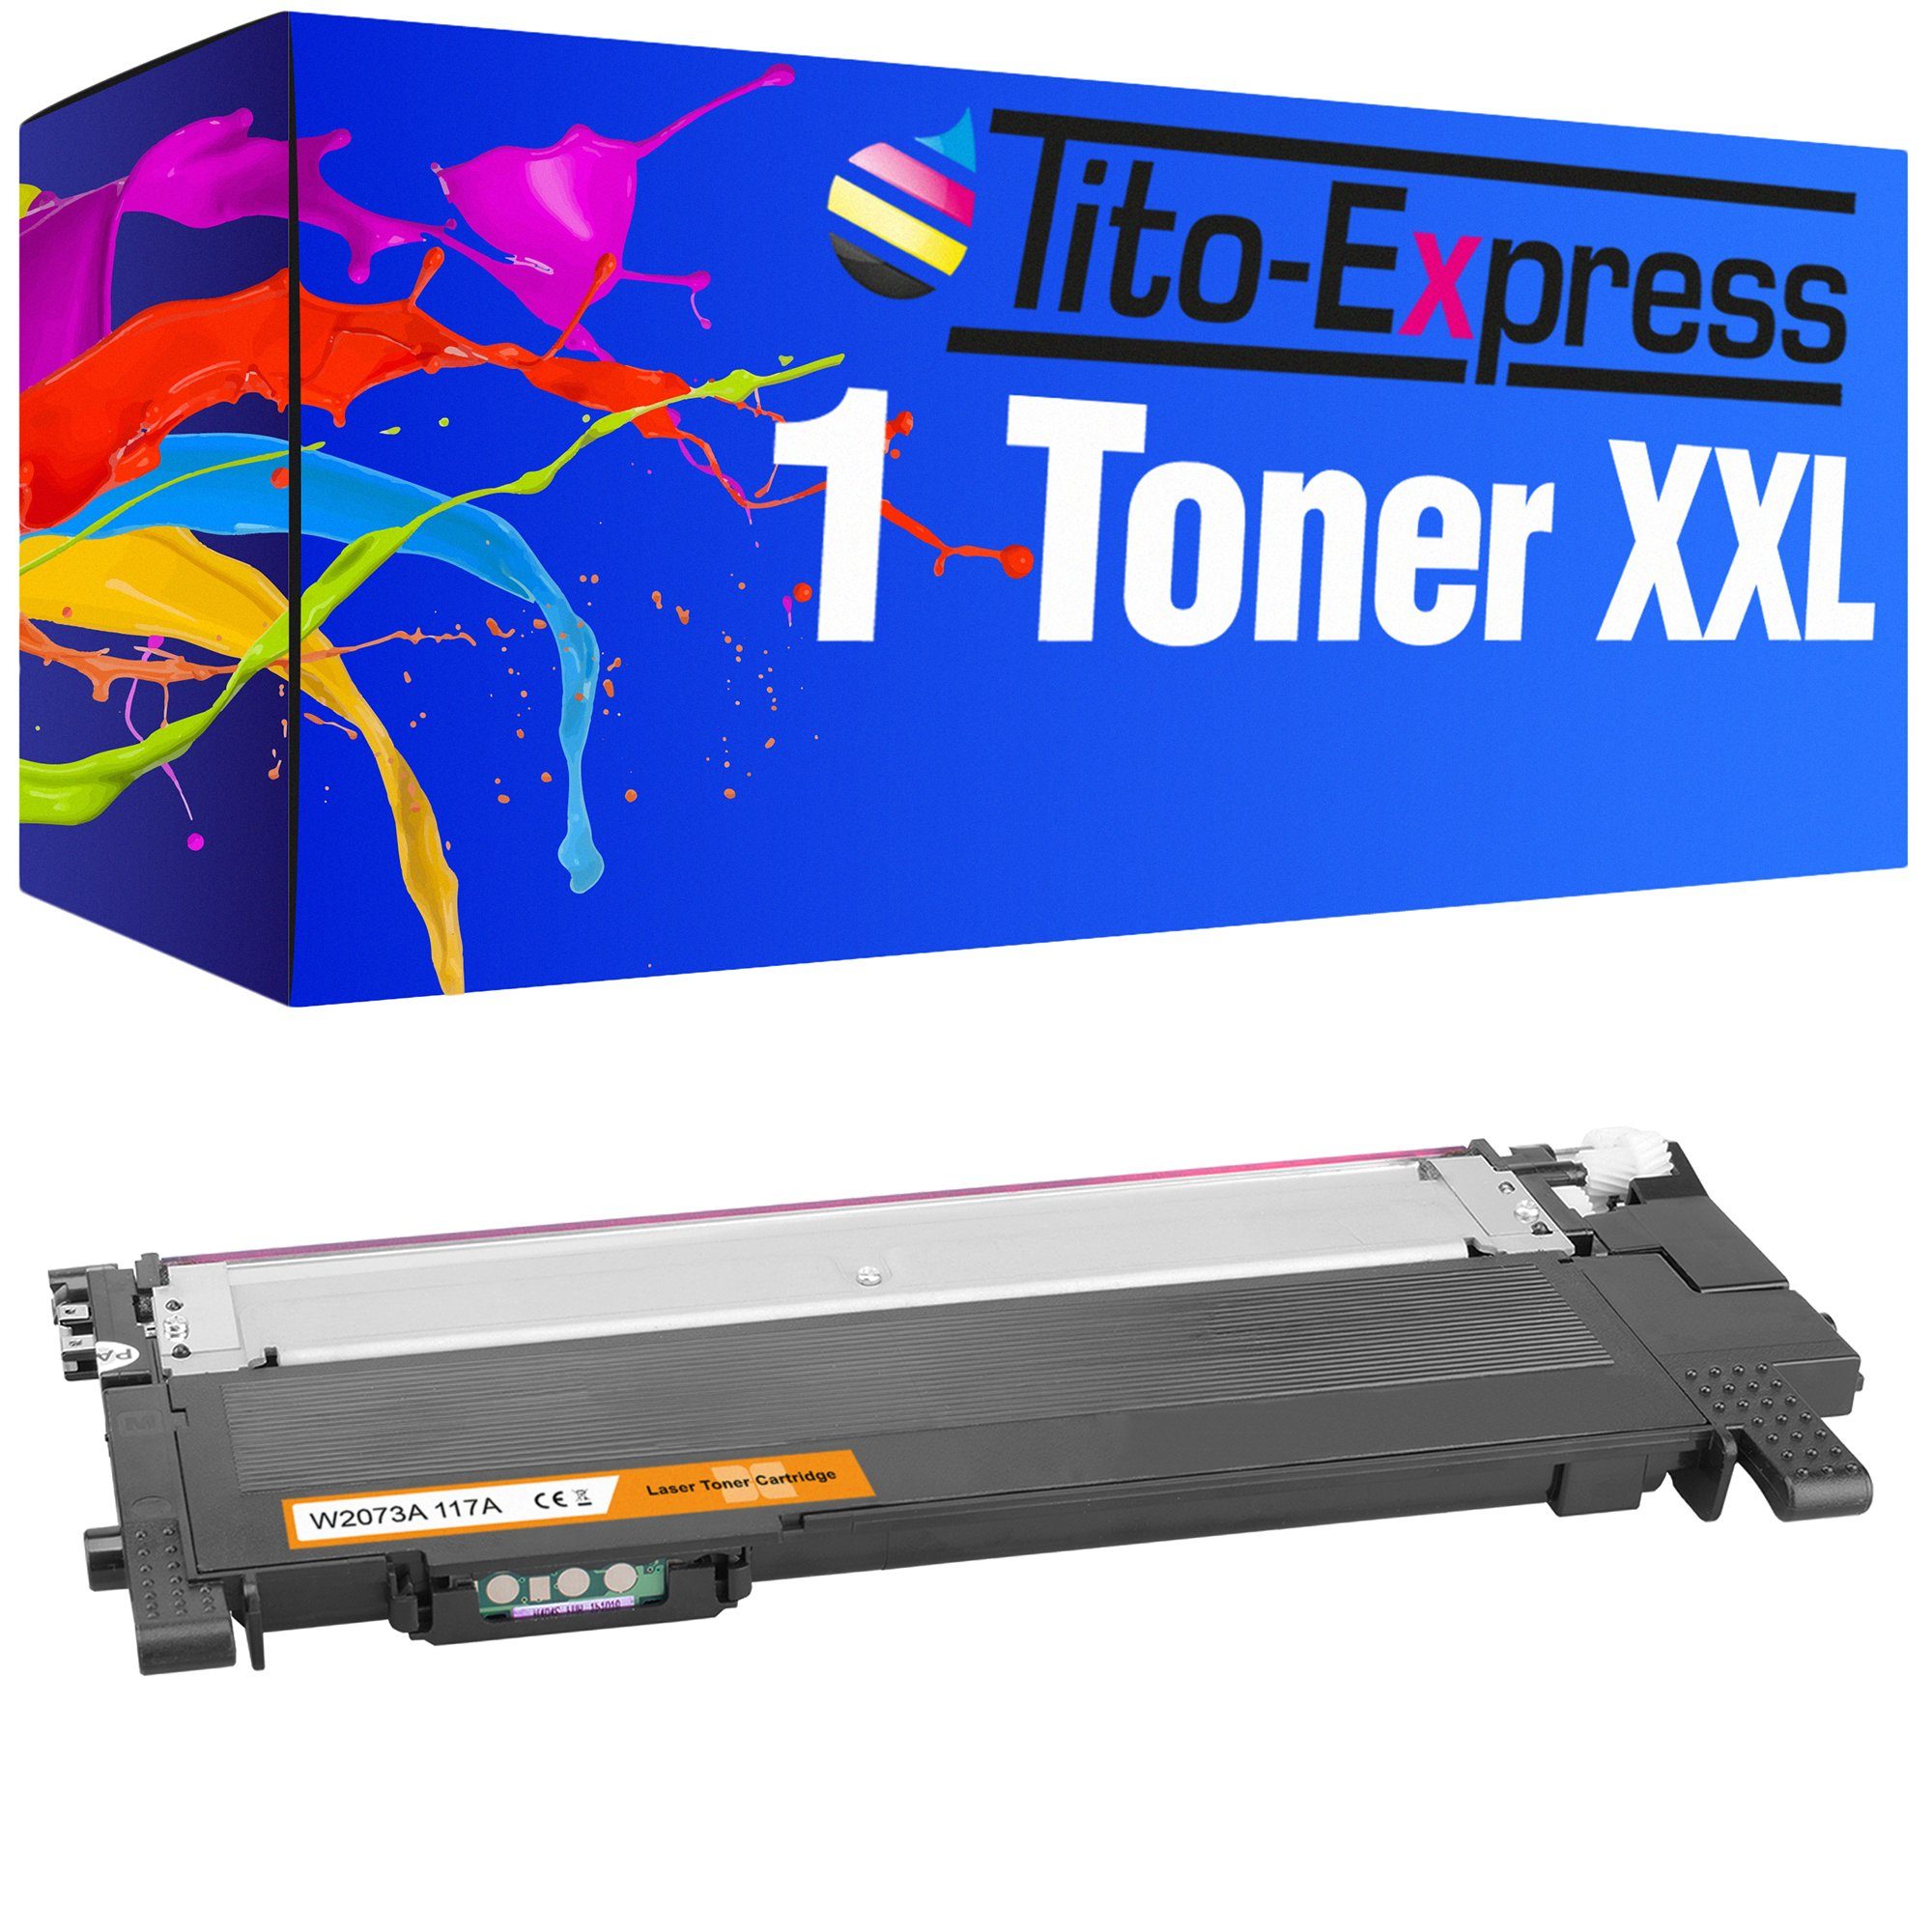 150nw 2070 150a HP ersetzt Magenta), 179fwg Color Laser W MFP-170 117A, Tonerpatrone (1x für A 178nw Tito-Express HP W2070A 179fnw 178nwg MFP